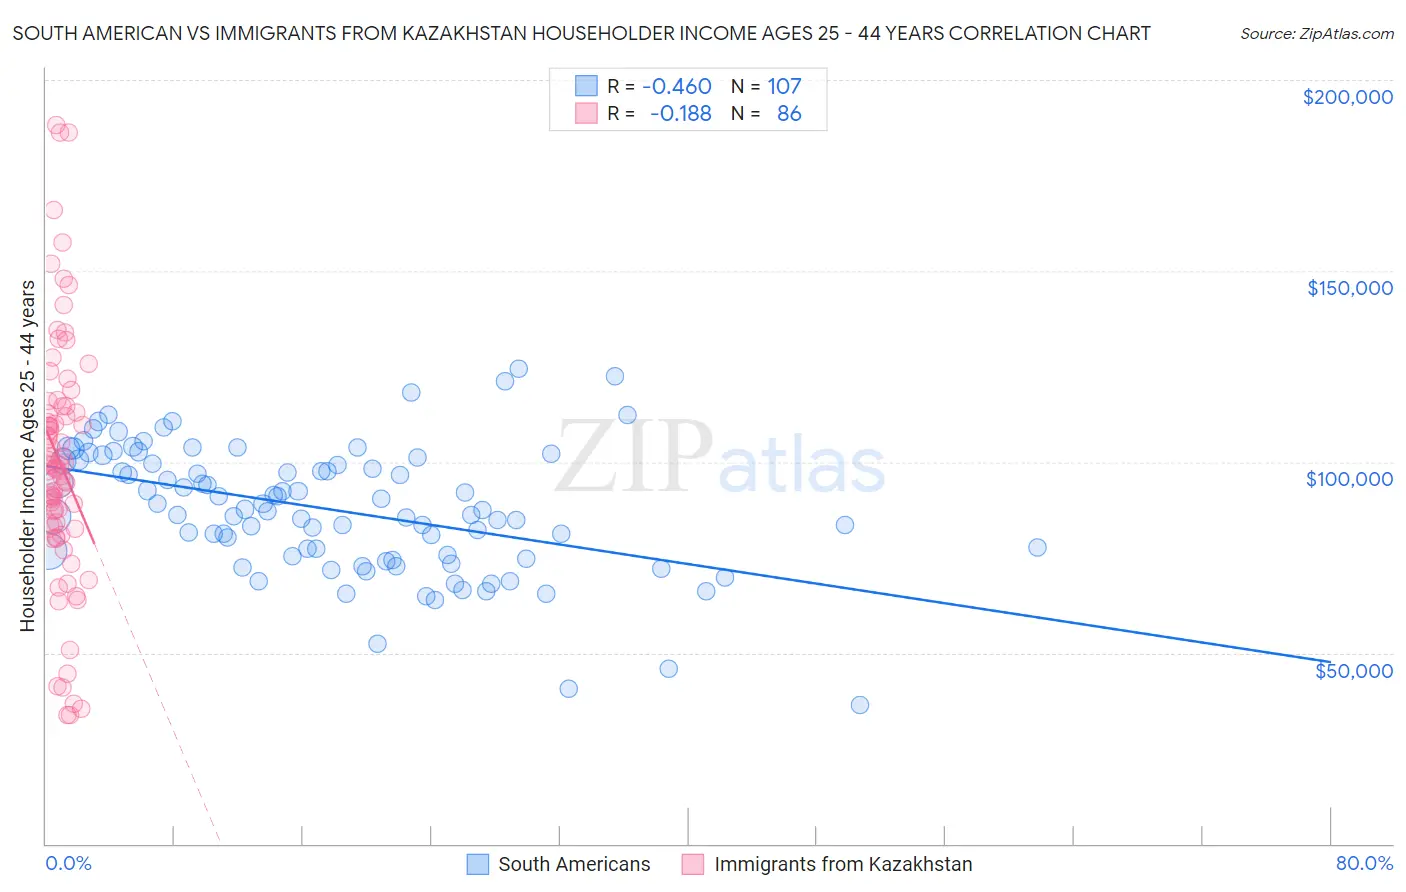 South American vs Immigrants from Kazakhstan Householder Income Ages 25 - 44 years